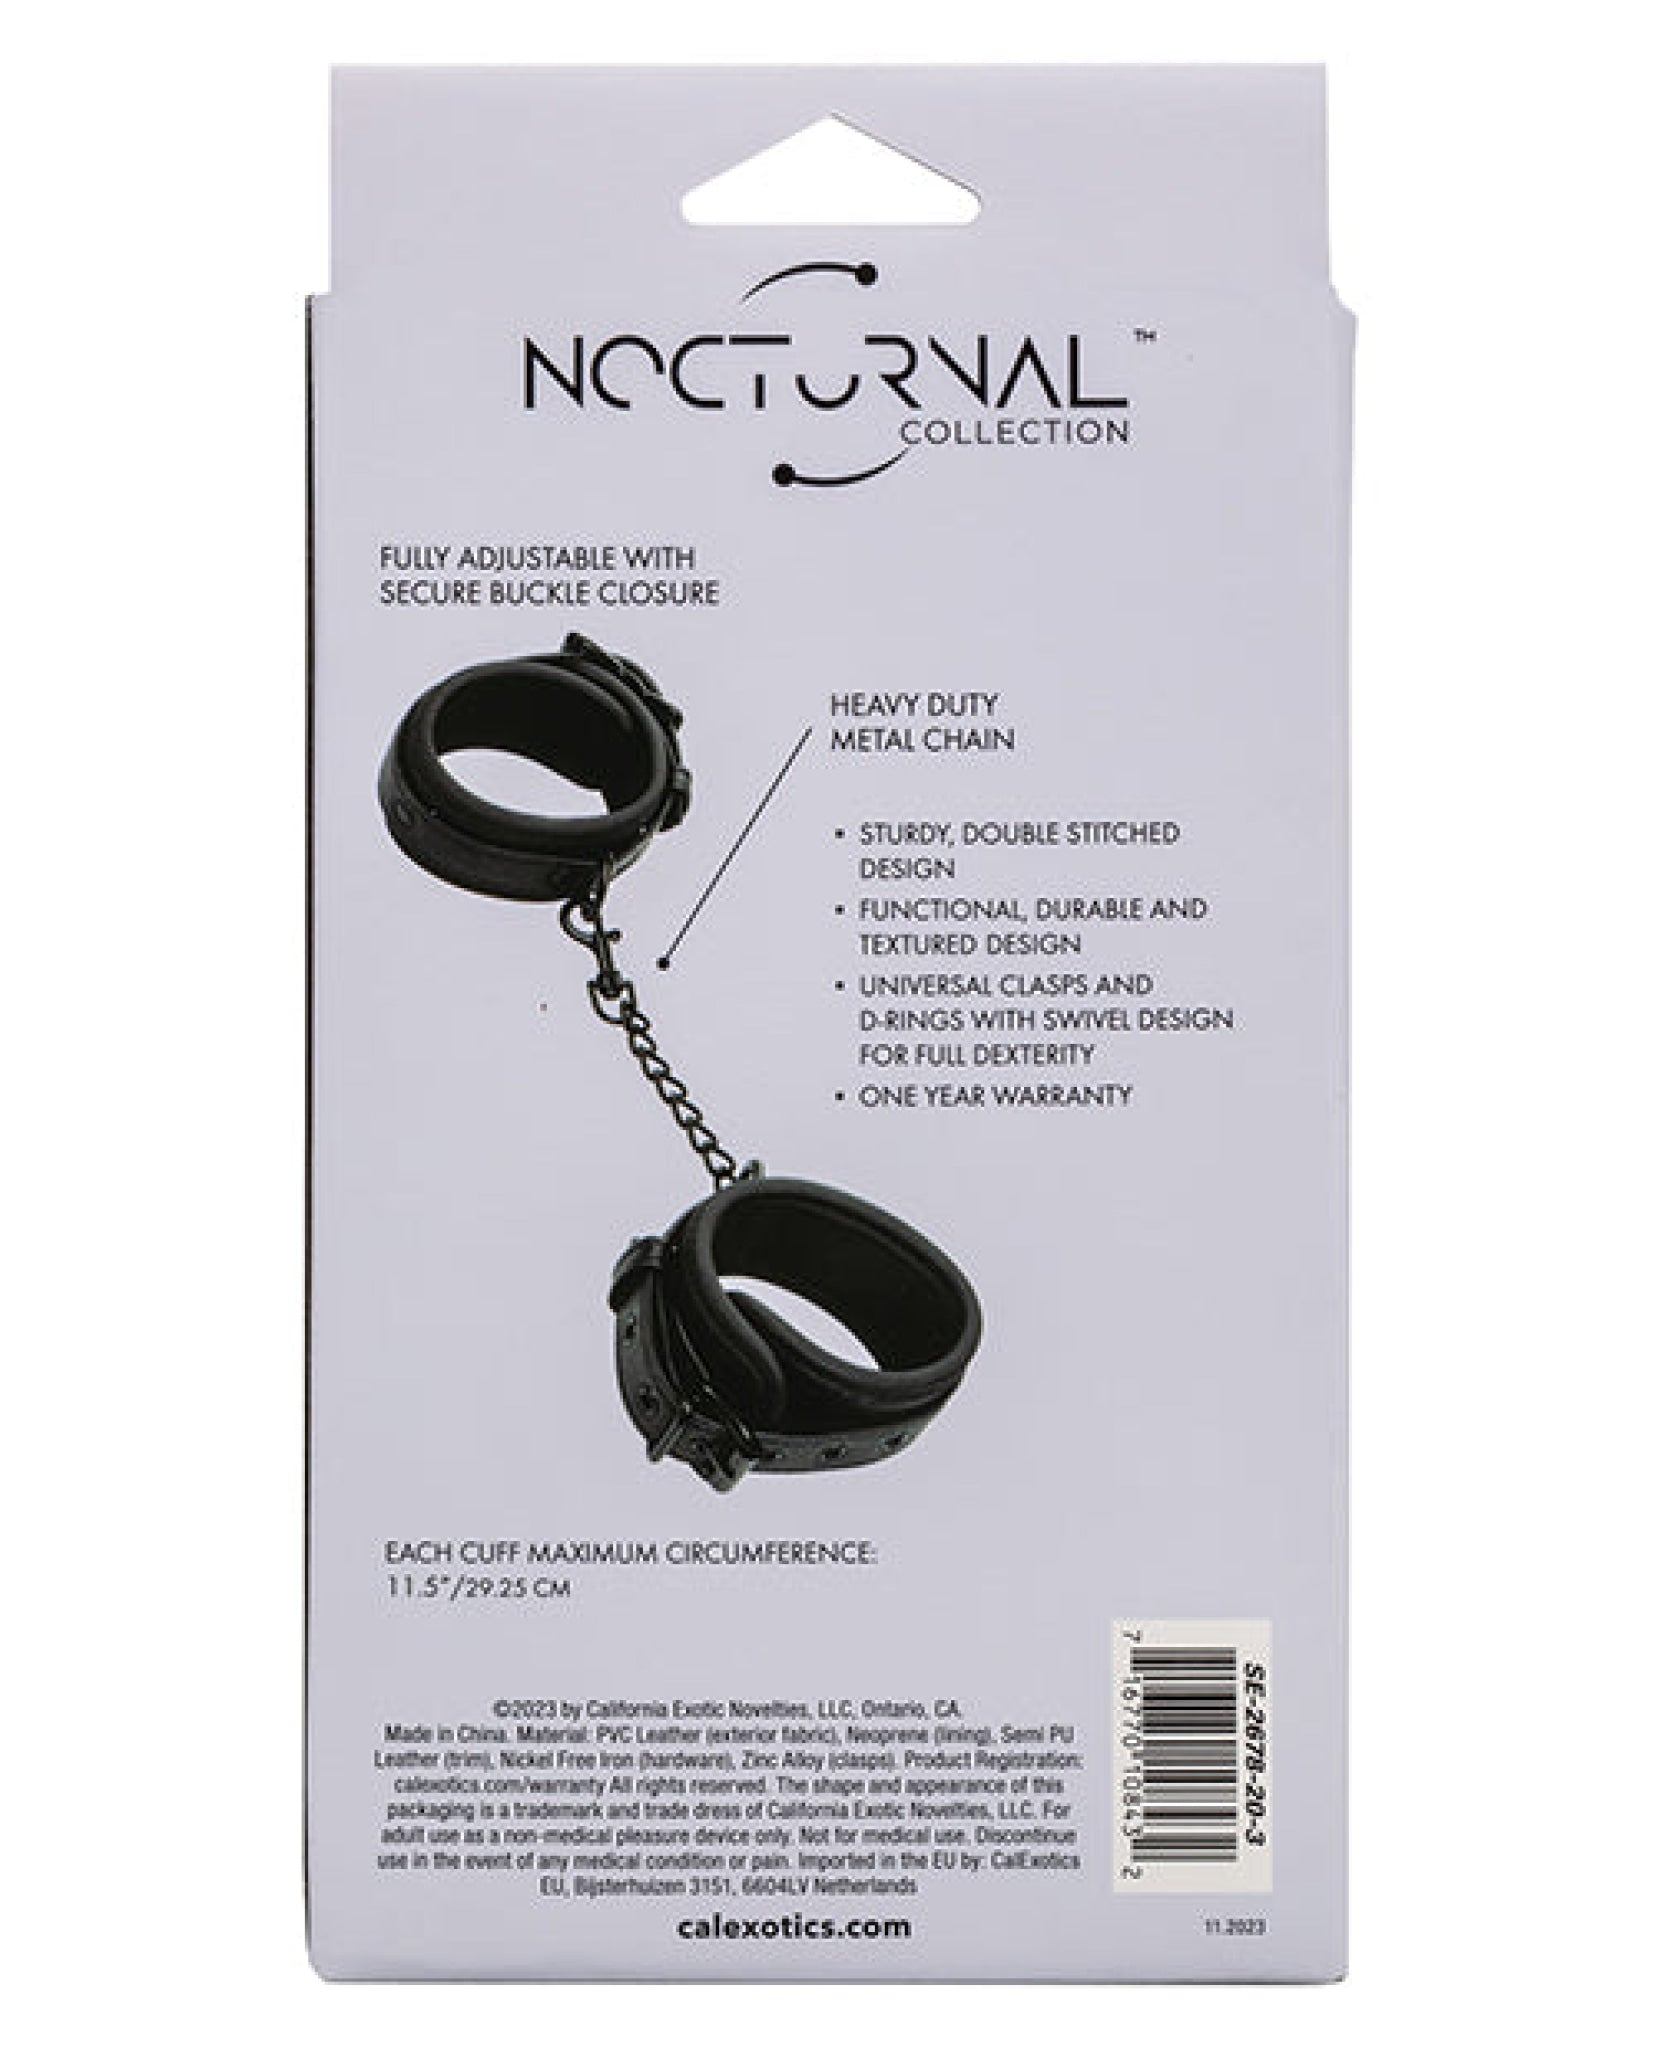 Nocturnal Collection Adjustable Ankle Cuffs - Black California Exotic Novelties